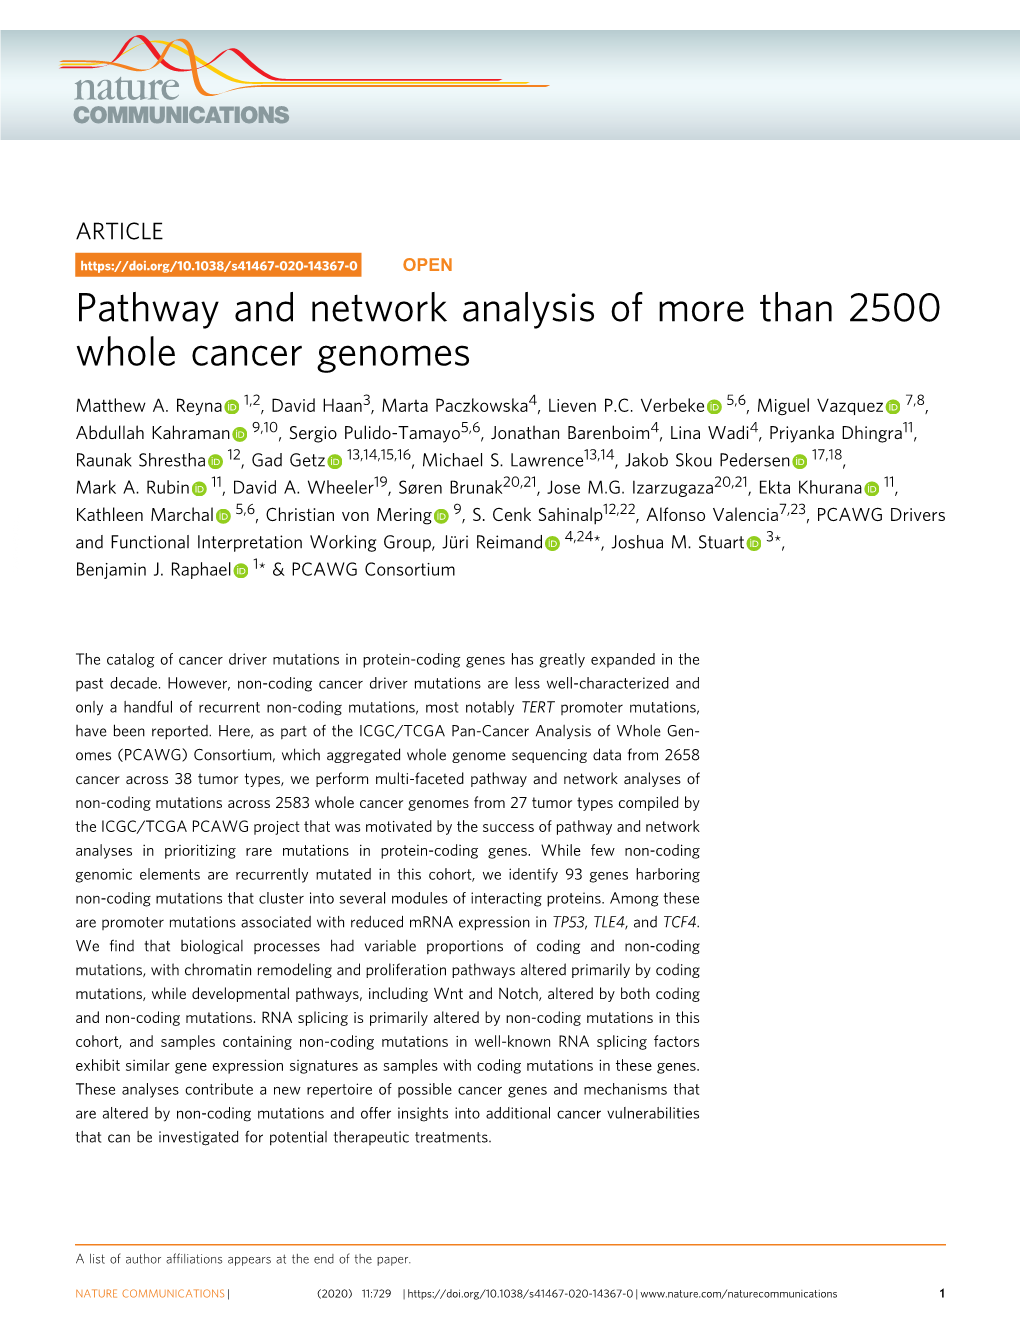 Pathway and Network Analysis of More Than 2500 Whole Cancer Genomes